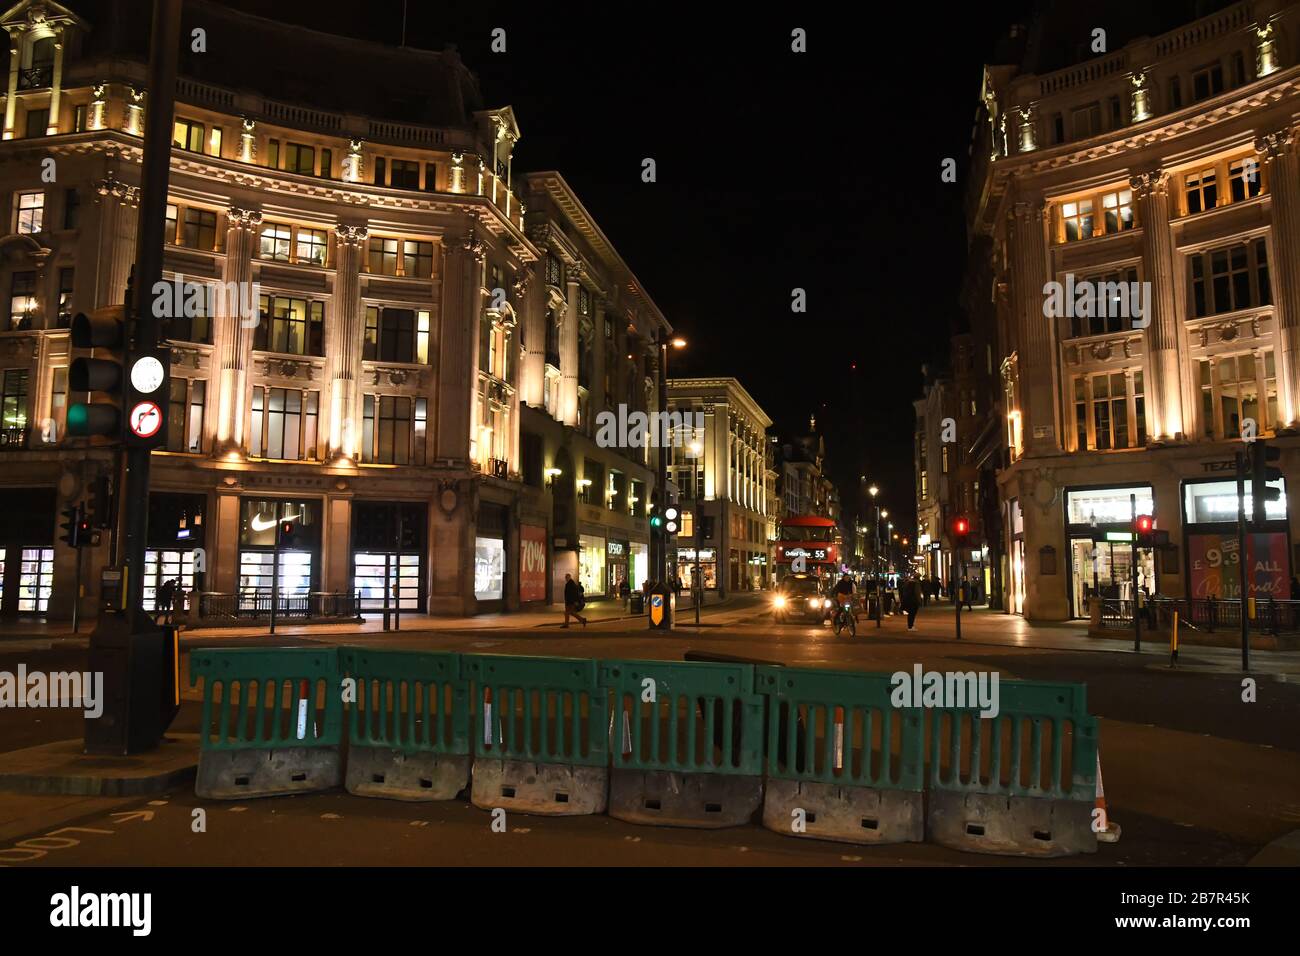 London, UK. 17th Mar 2020. Empty Oxford Street, Regent Street and underground usually full of people walking window browsing. The #coronovirus the street is empty on 17th March 2020, London, UK. Credit: Picture Capital/Alamy Live News Stock Photo